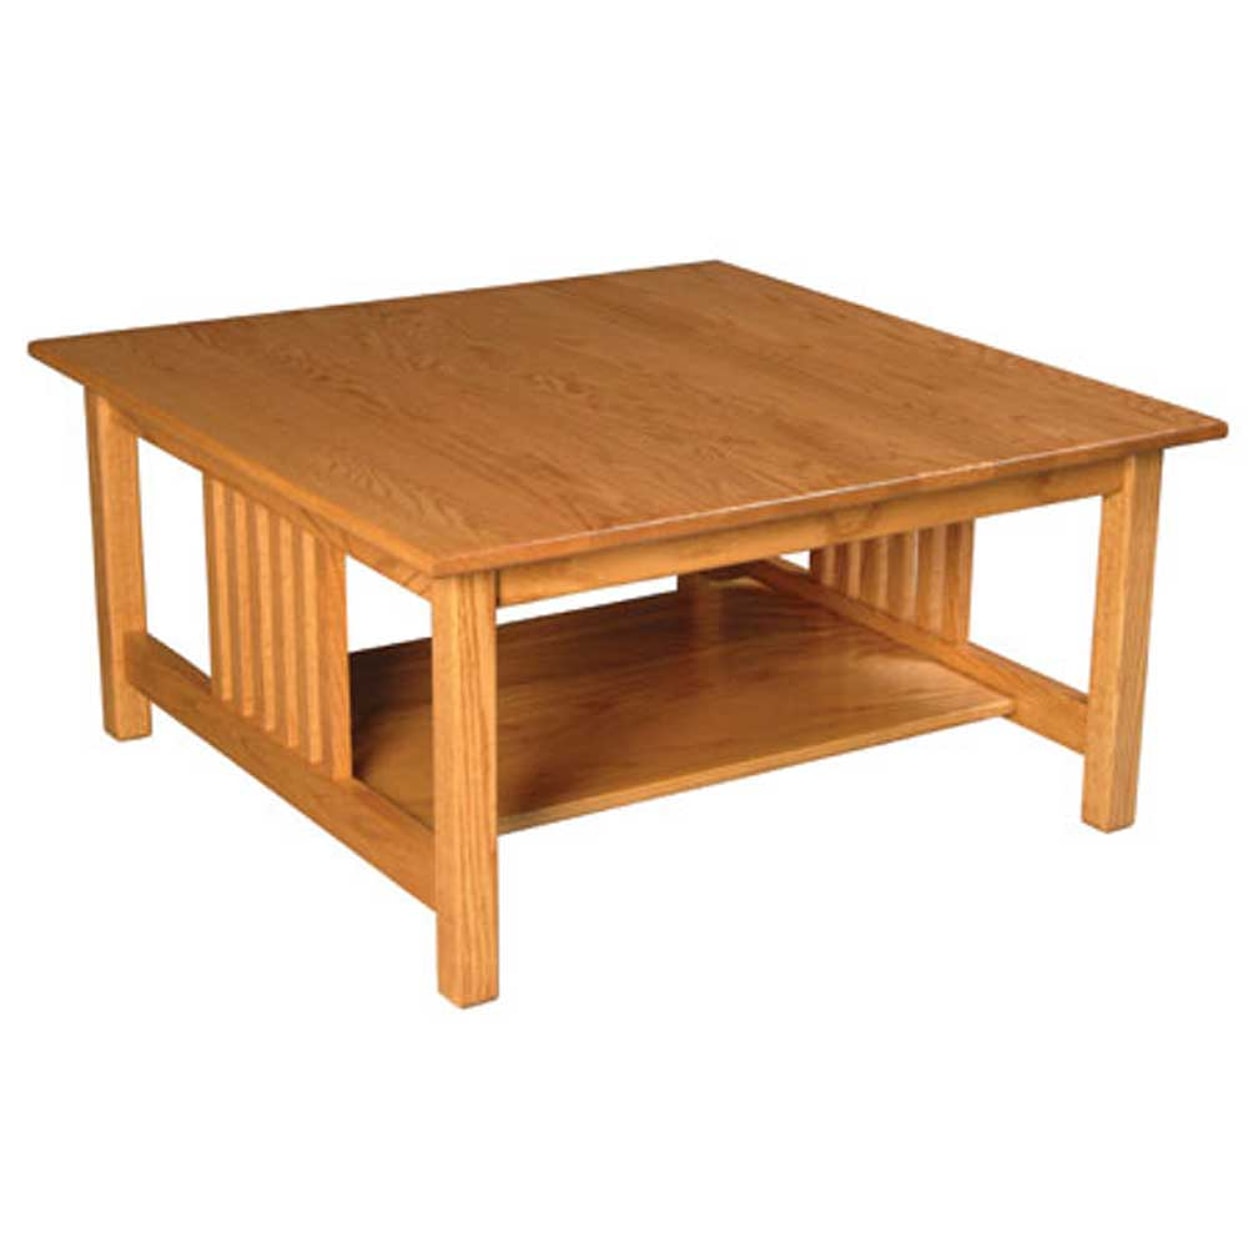 Simply Amish Mission Amish Square Coffee Table